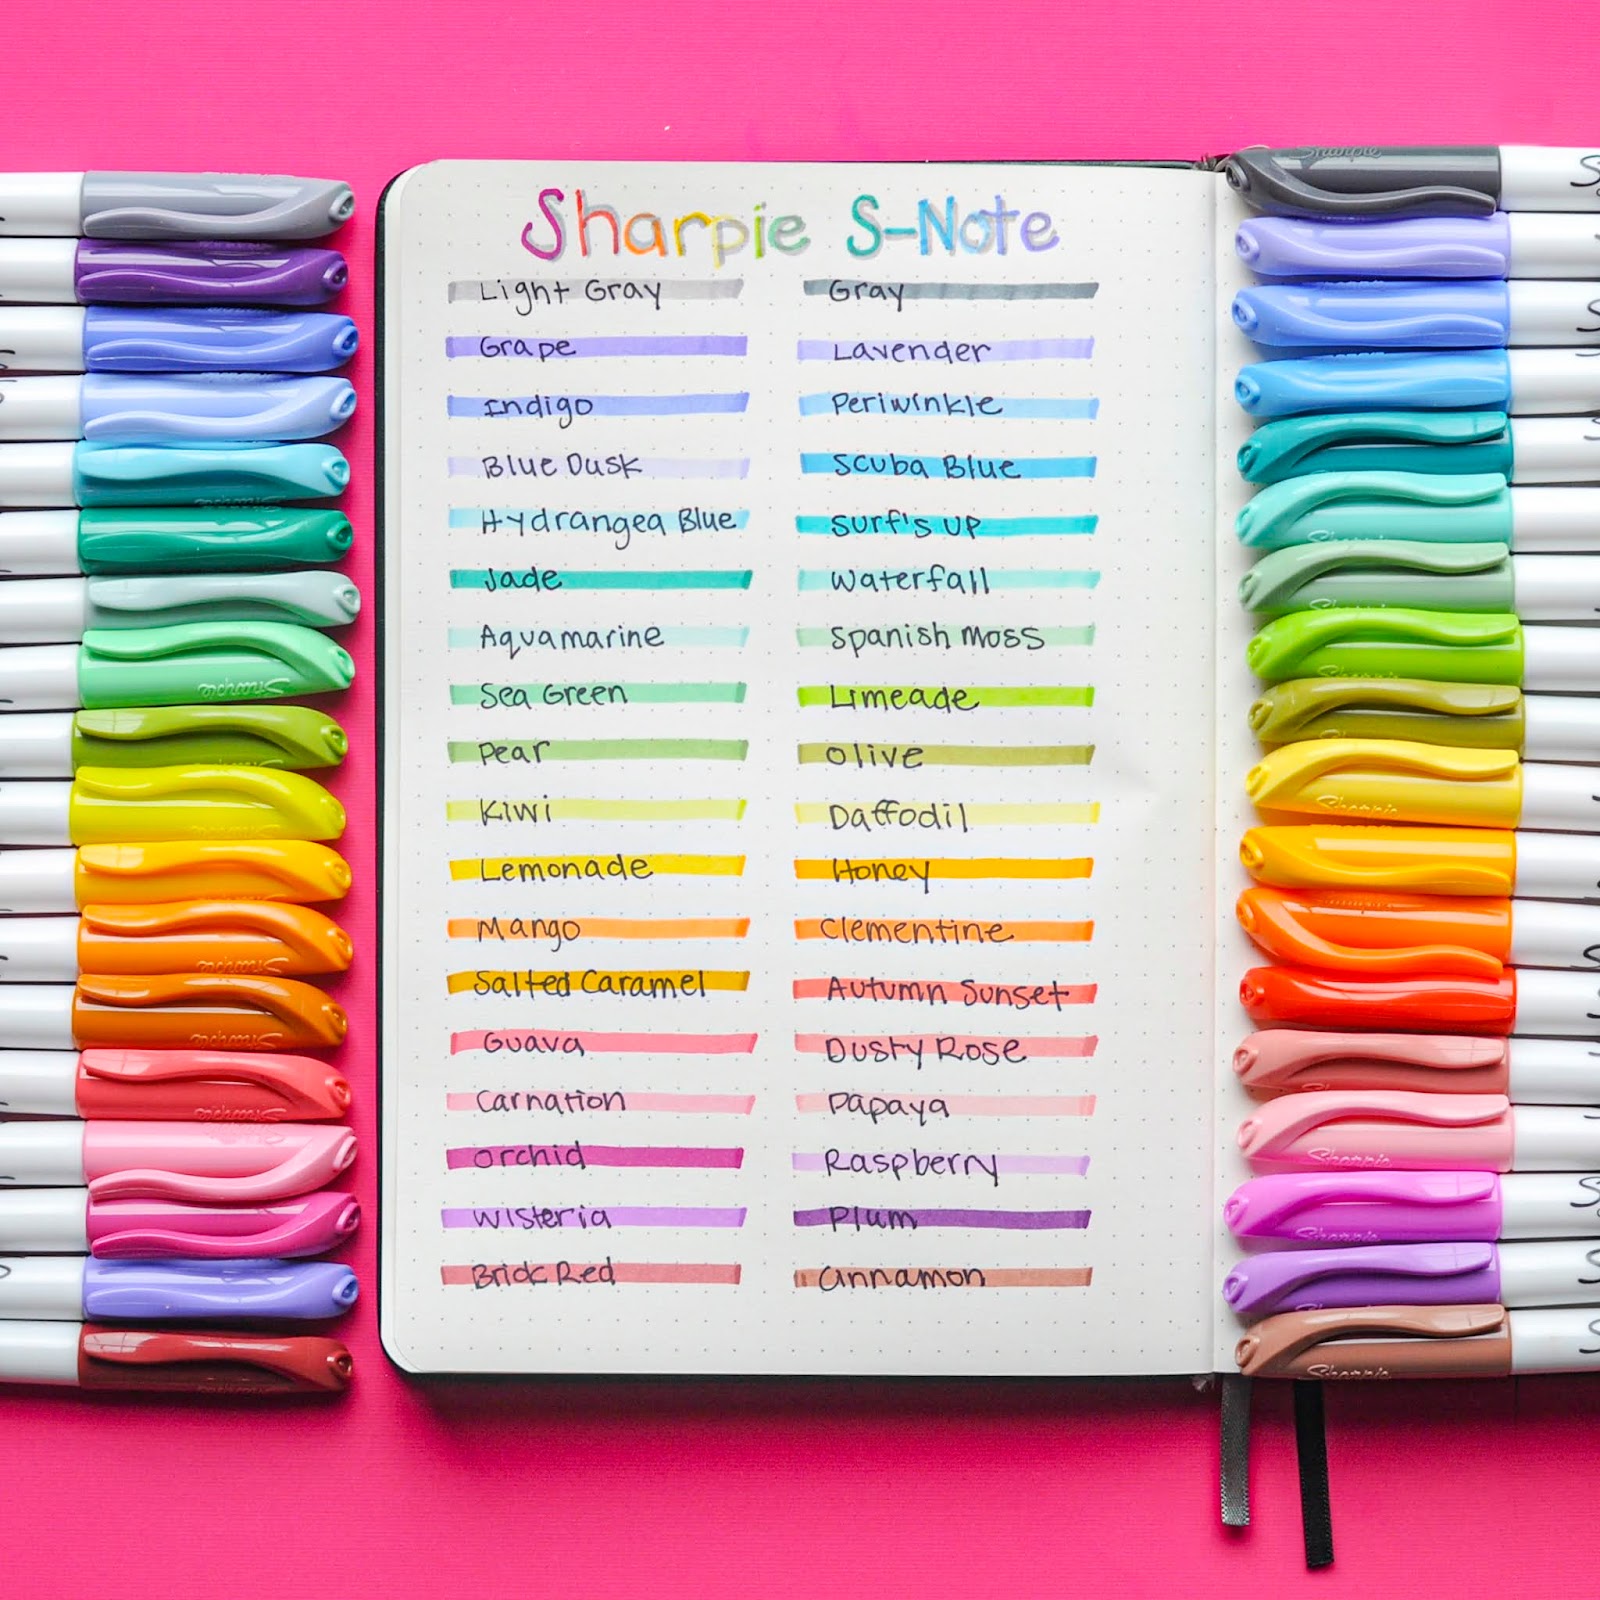 Product Review - Sharpie S Note Creative Markers 